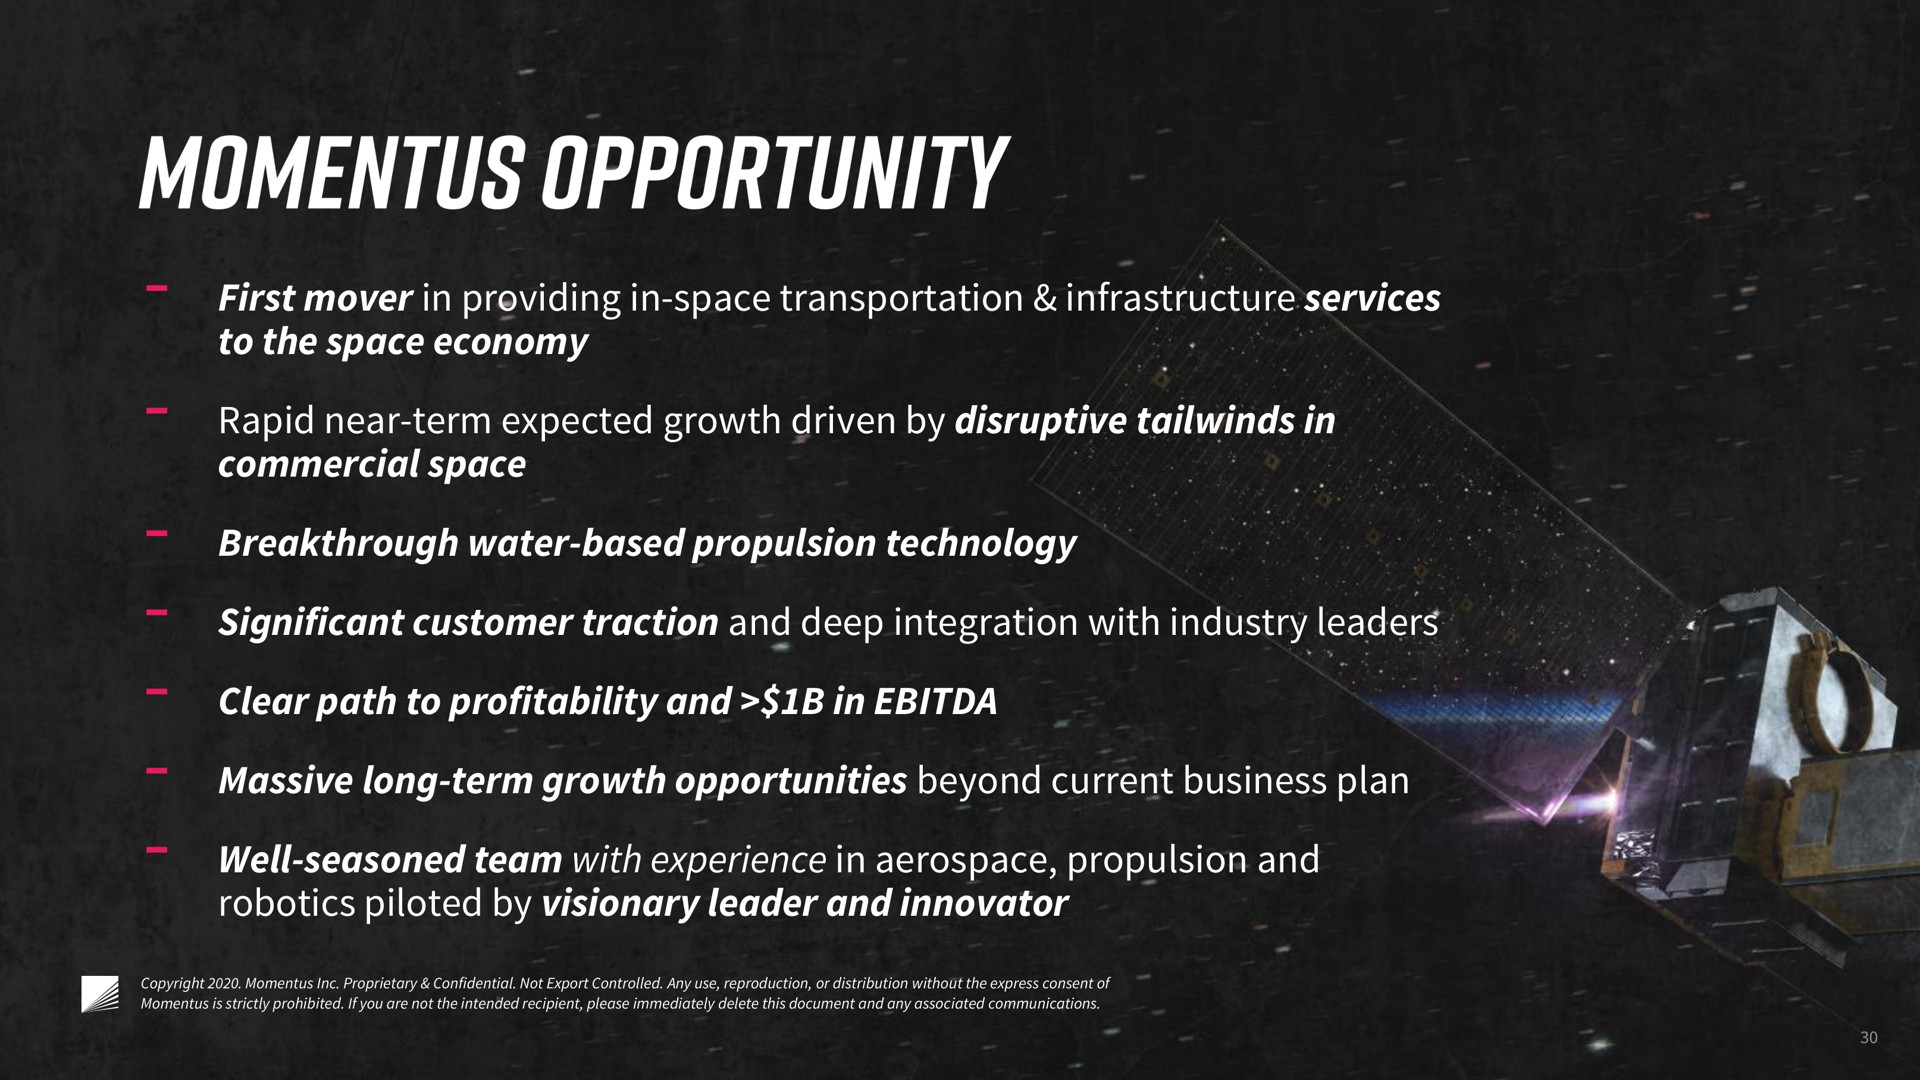 commercial space to the space economy first mover in providing in space transportation infrastructure services rapid near term expected growth driven by disruptive in breakthrough water based propulsion technology significant customer traction and deep integration with industry leaders clear path to profitability and in massive long term growth opportunities beyond current business plan well seasoned team with experience in propulsion and piloted by visionary leader and innovator opportunity | Momentus